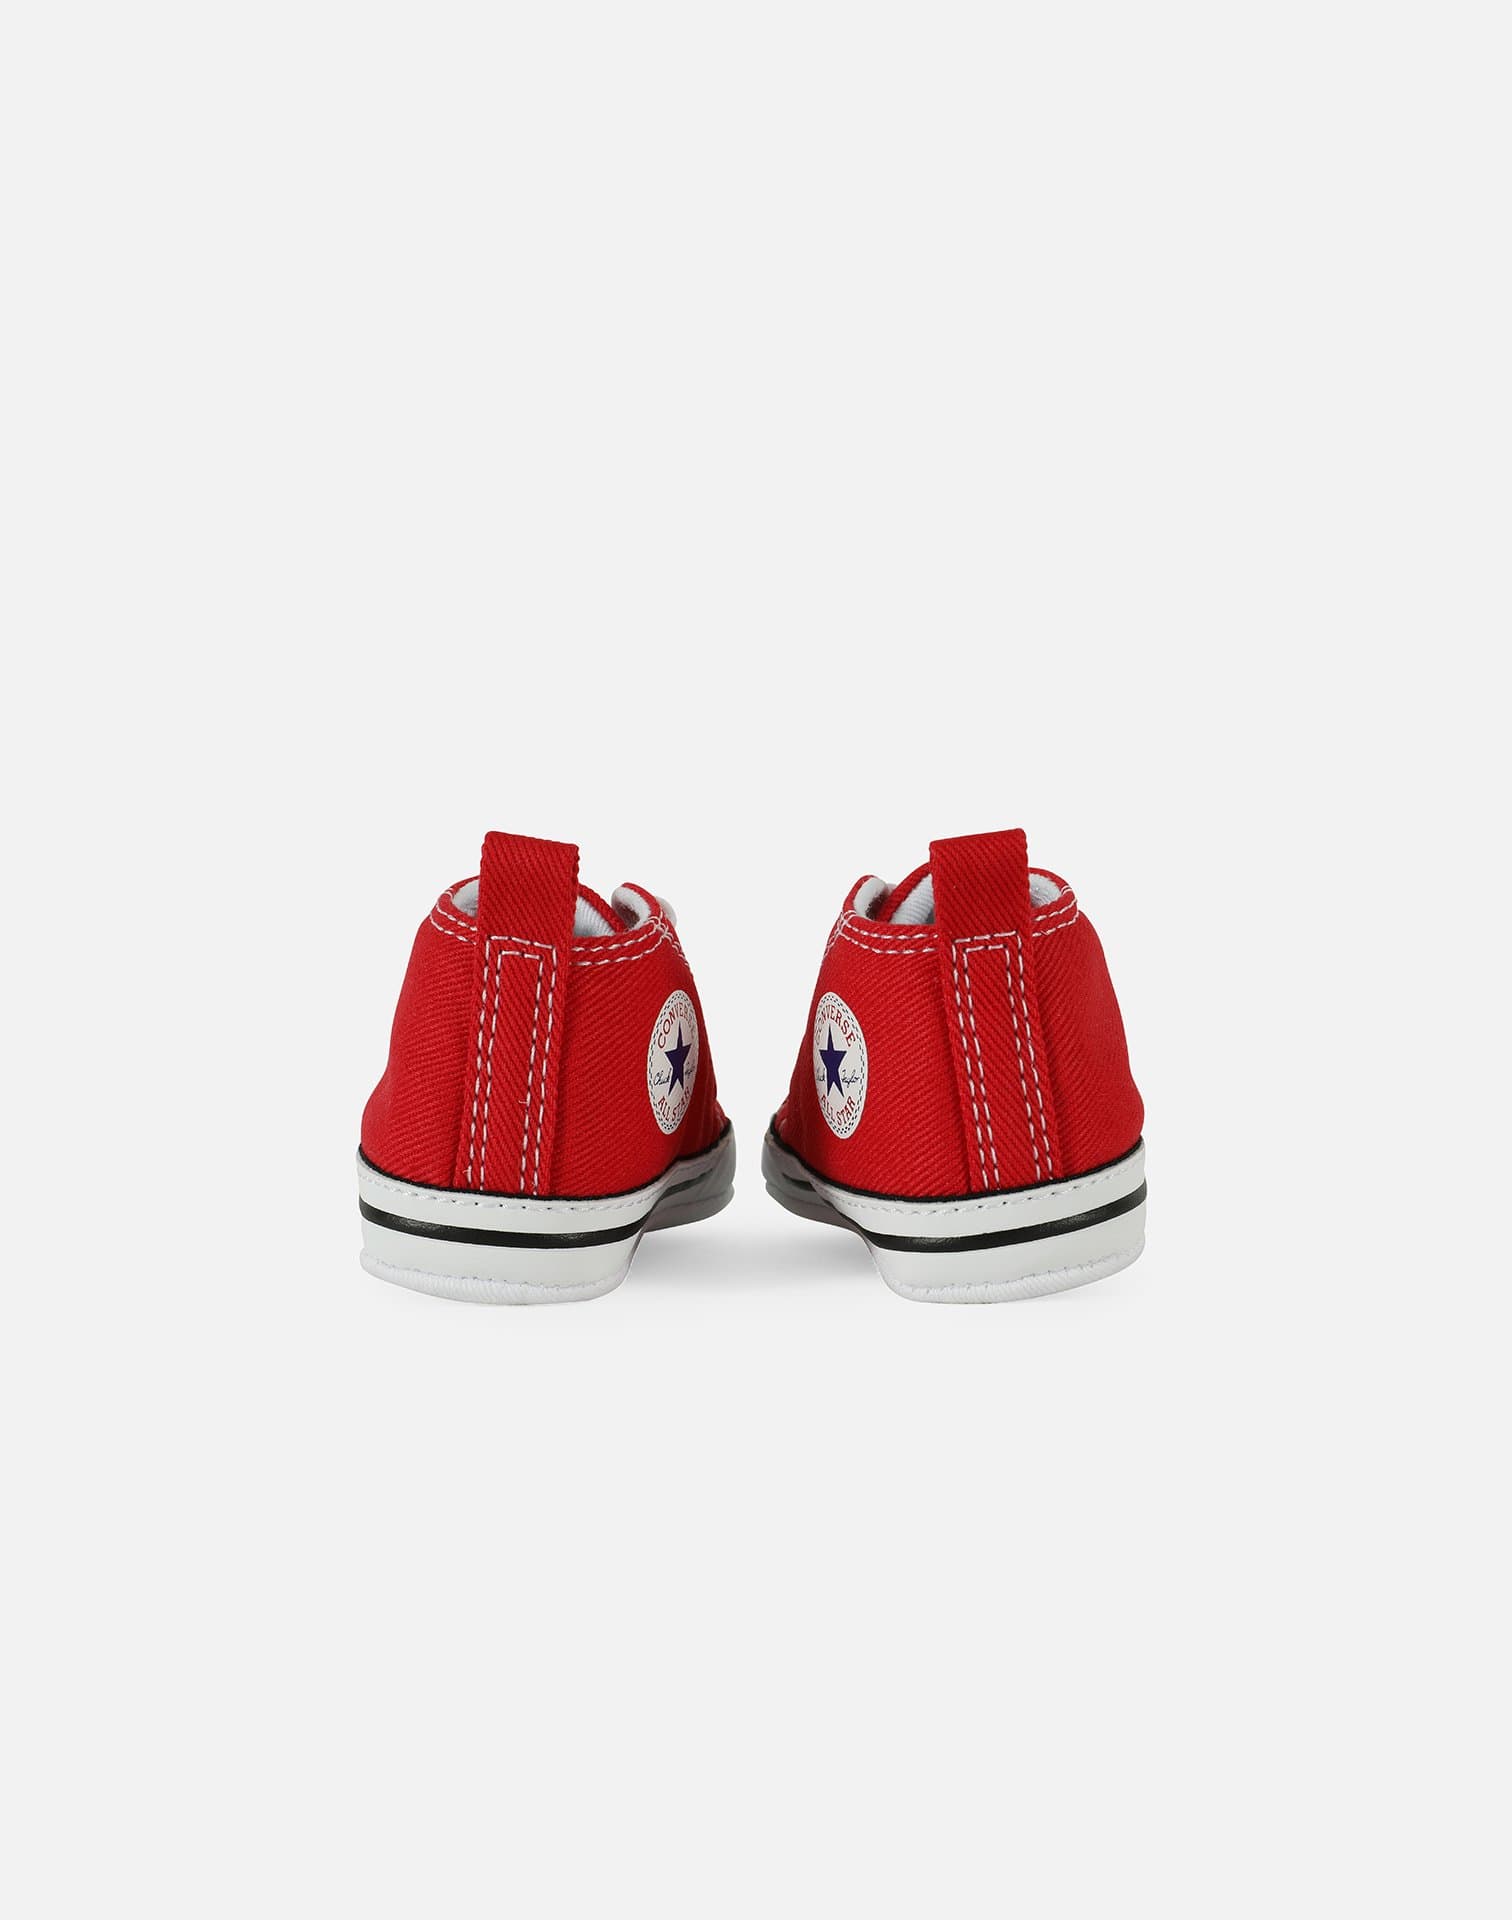 Converse Chuck Taylor All-Star Low Crib Bootie